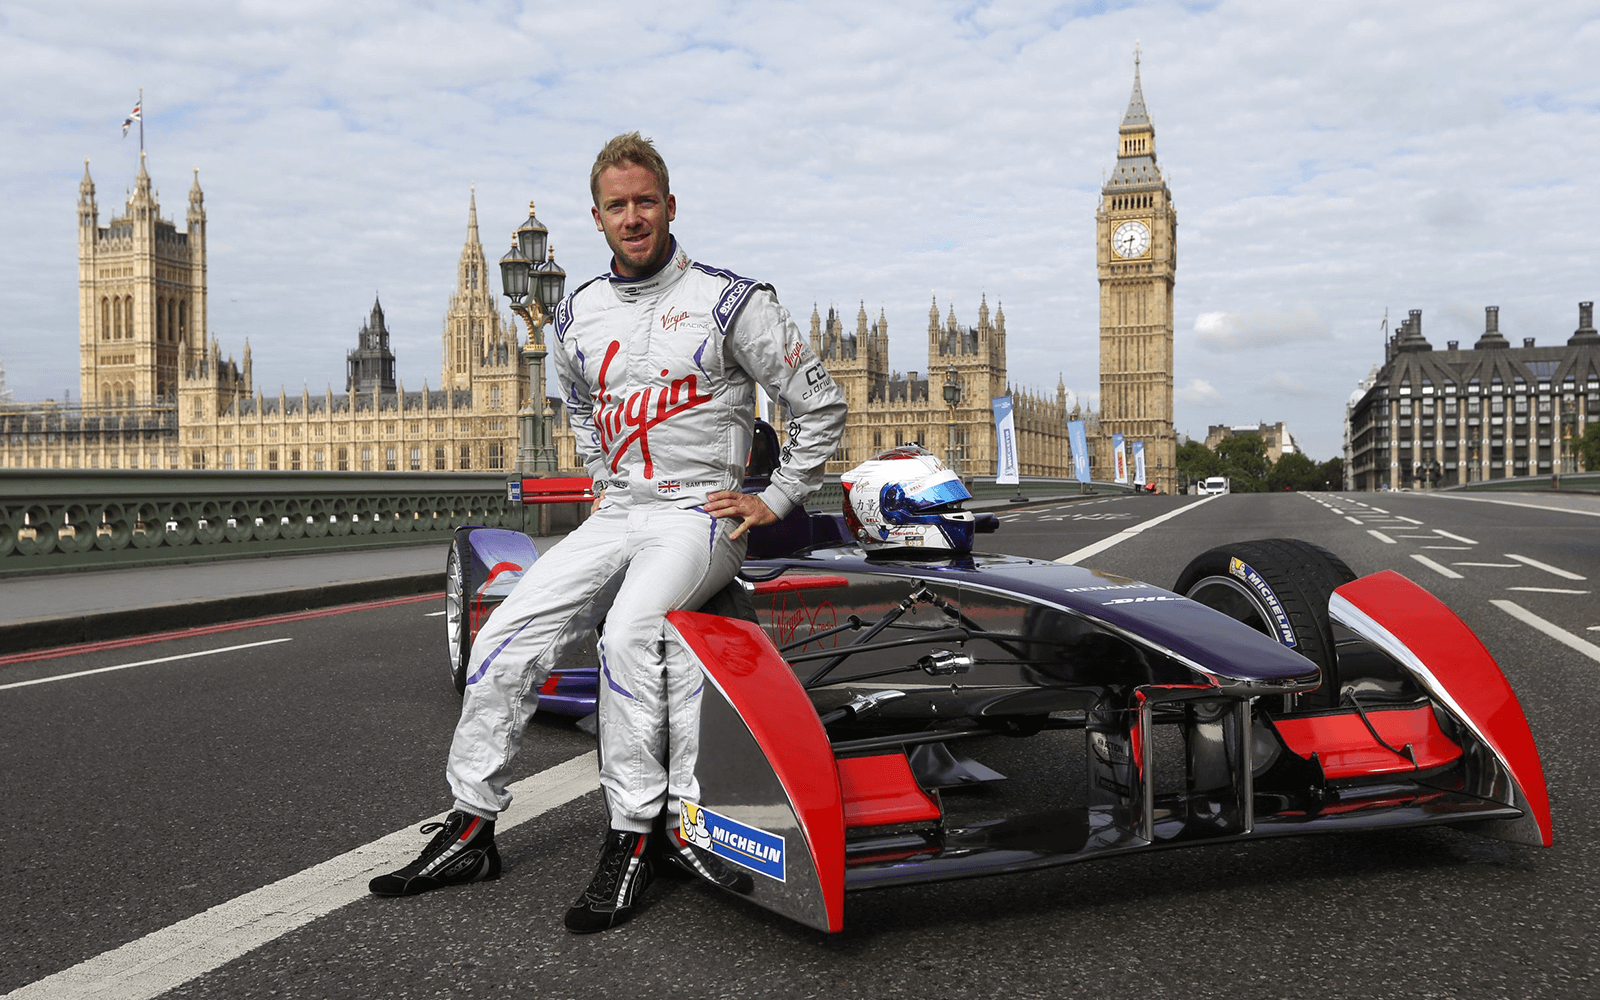 Racing driver, Sam Bird leaning on his car in front of Big Ben